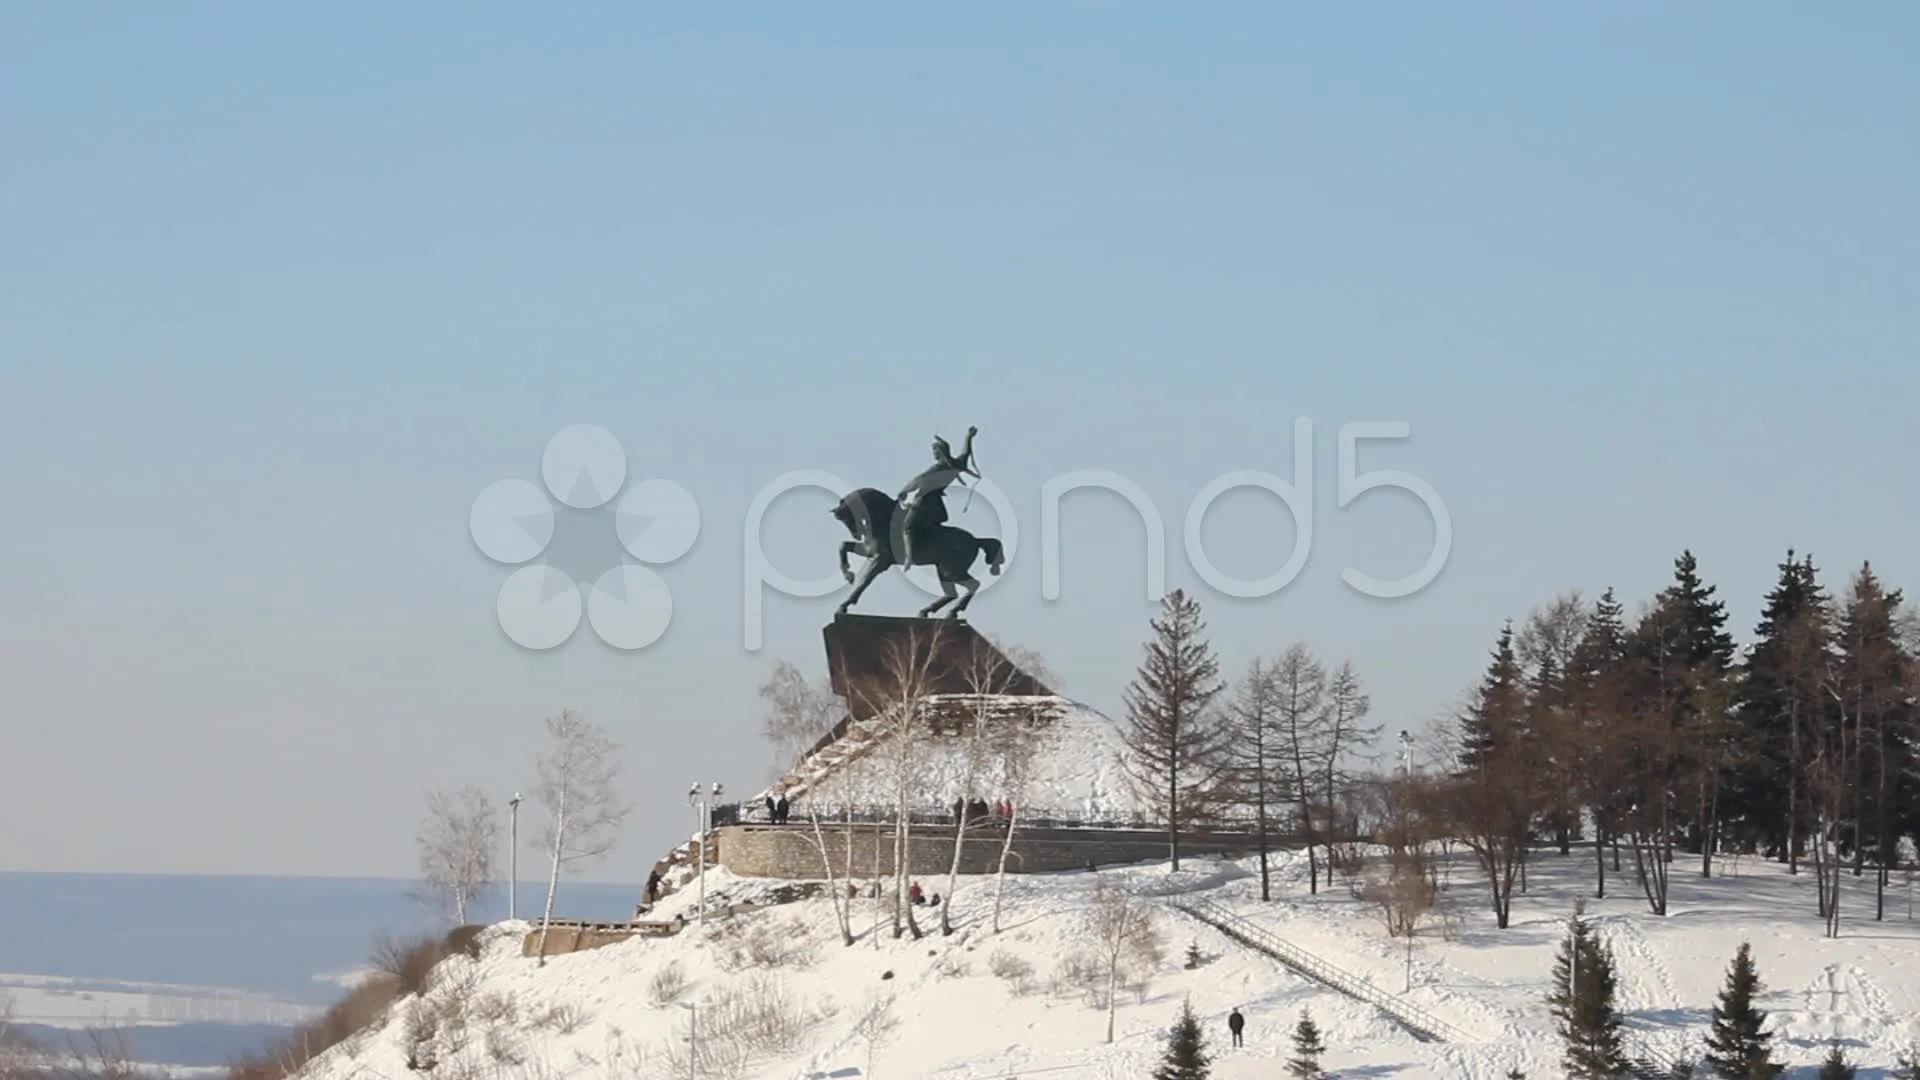 Monument To Salavat Yulaev in Ufa at Winter Aerial View Stock